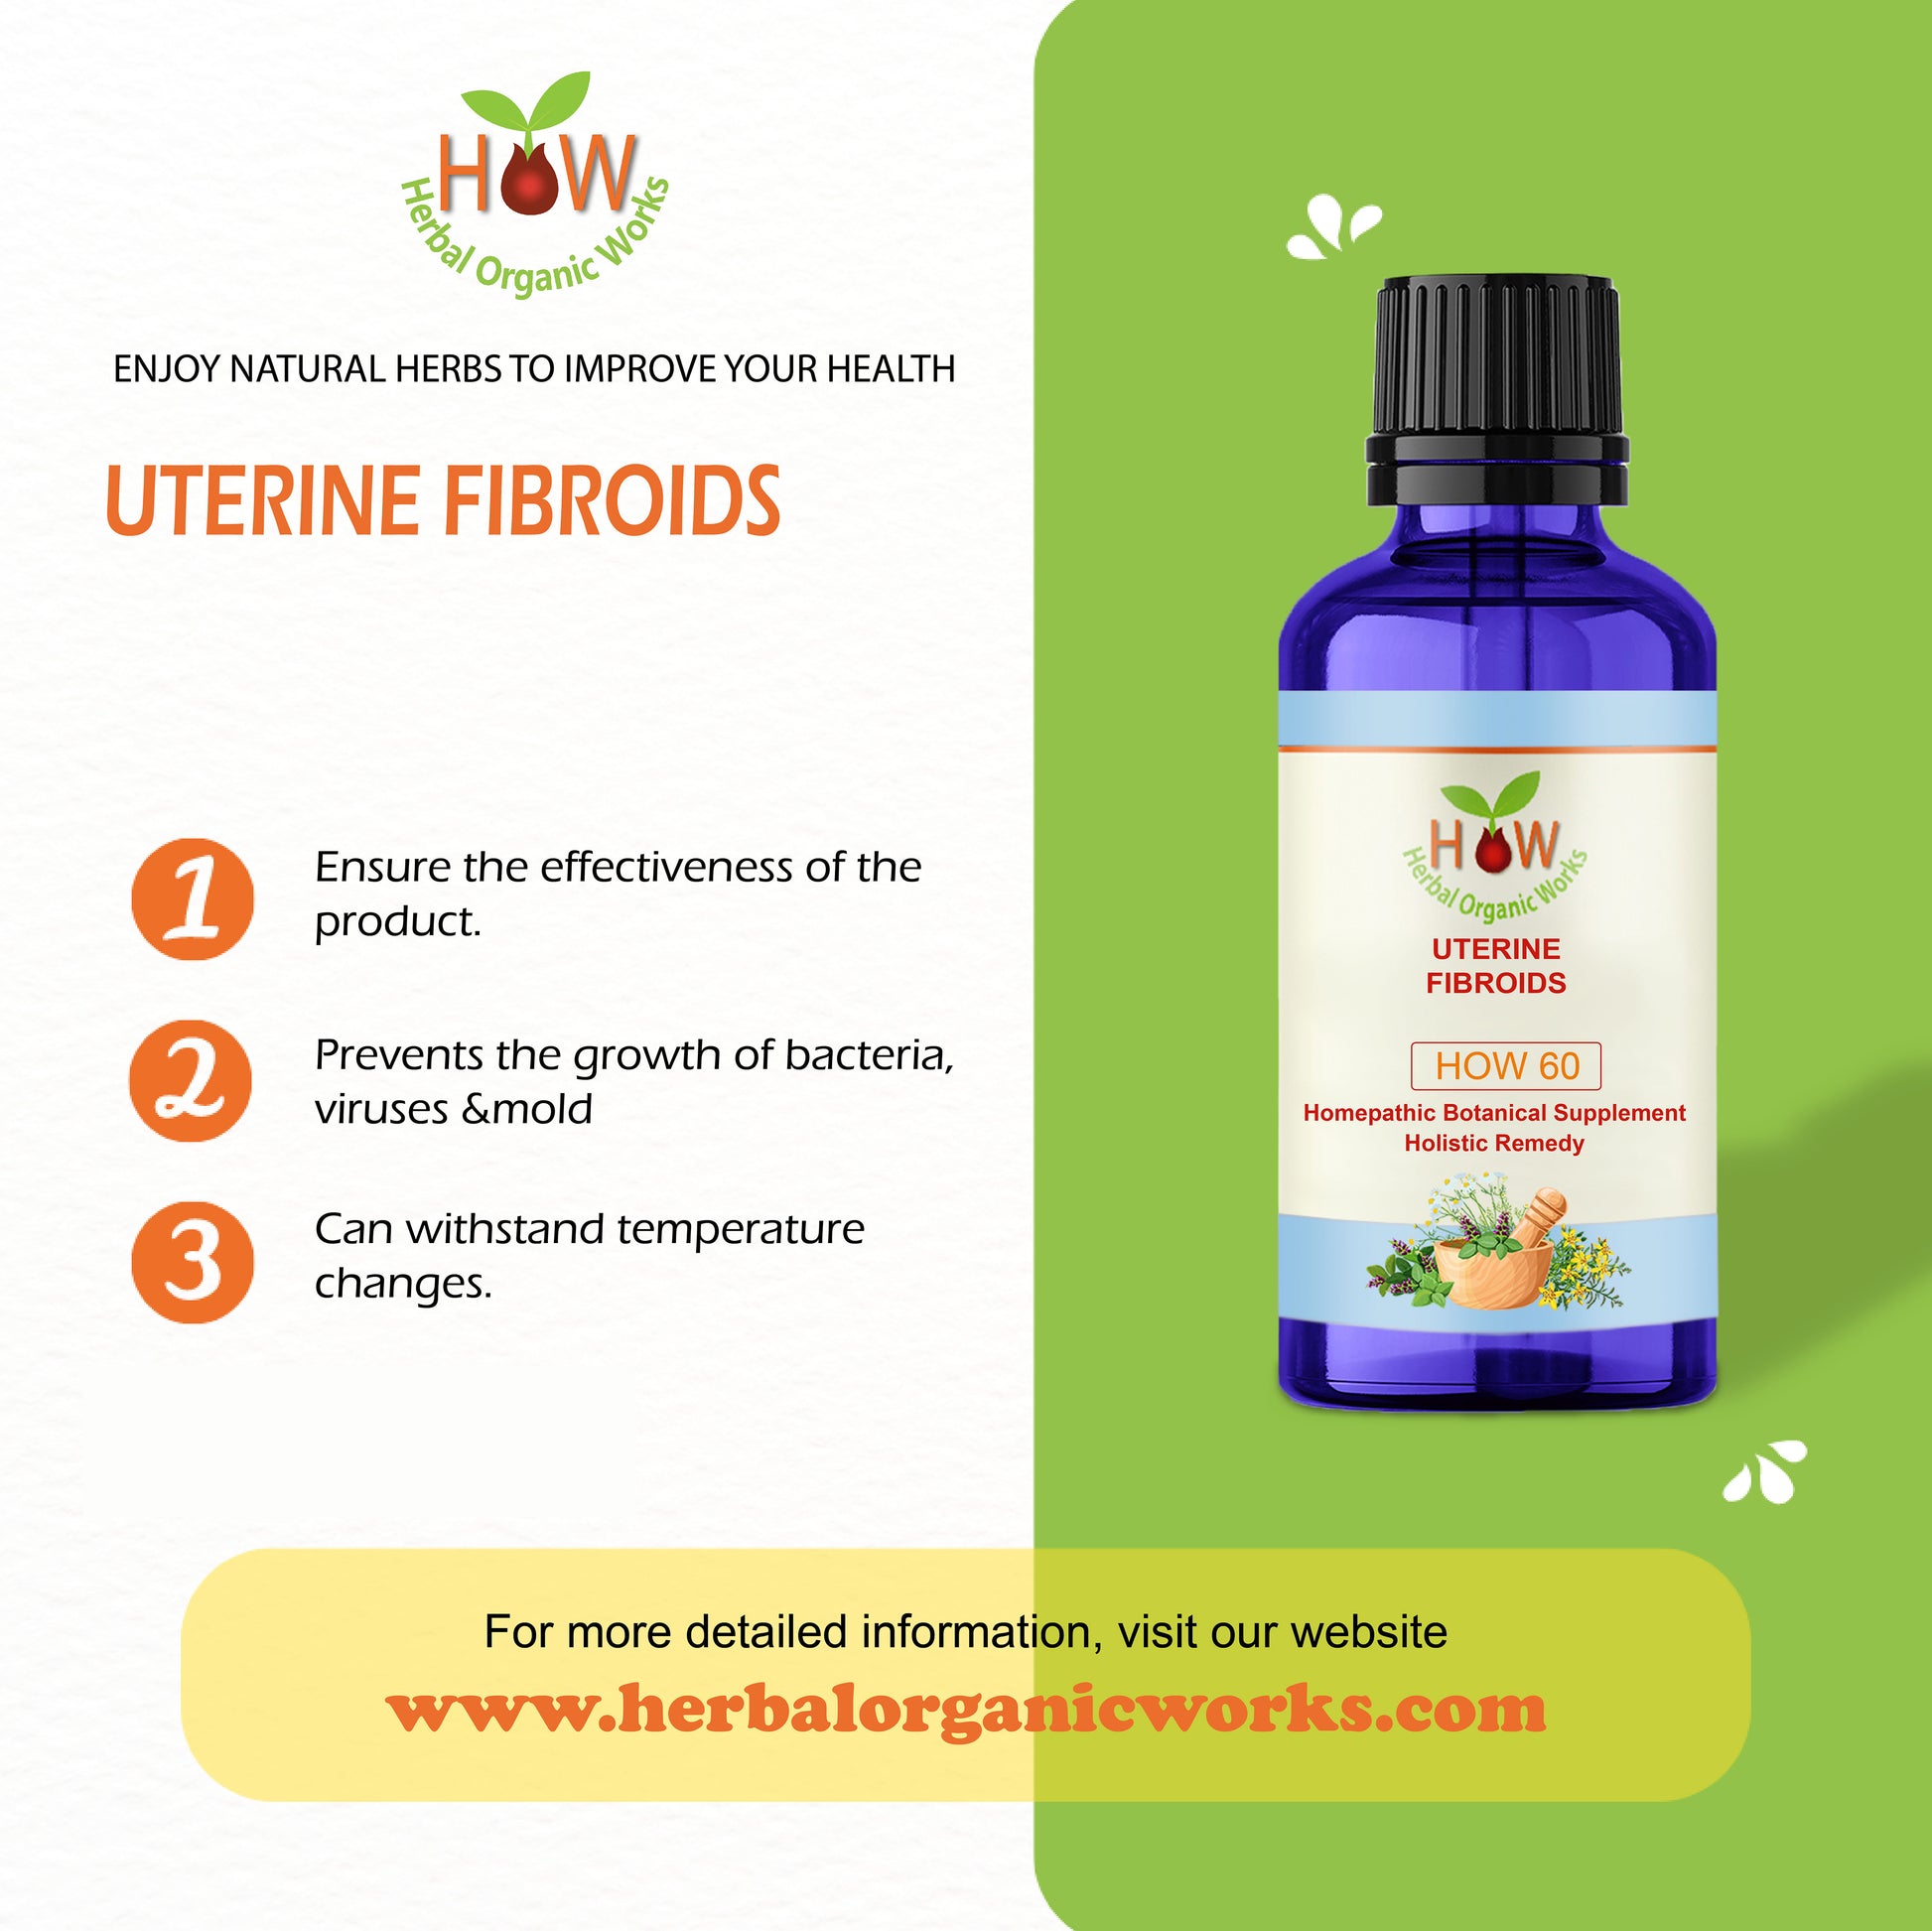 NATURAL REMEDY FOR UTERINE FIBROIDS (HOW60)